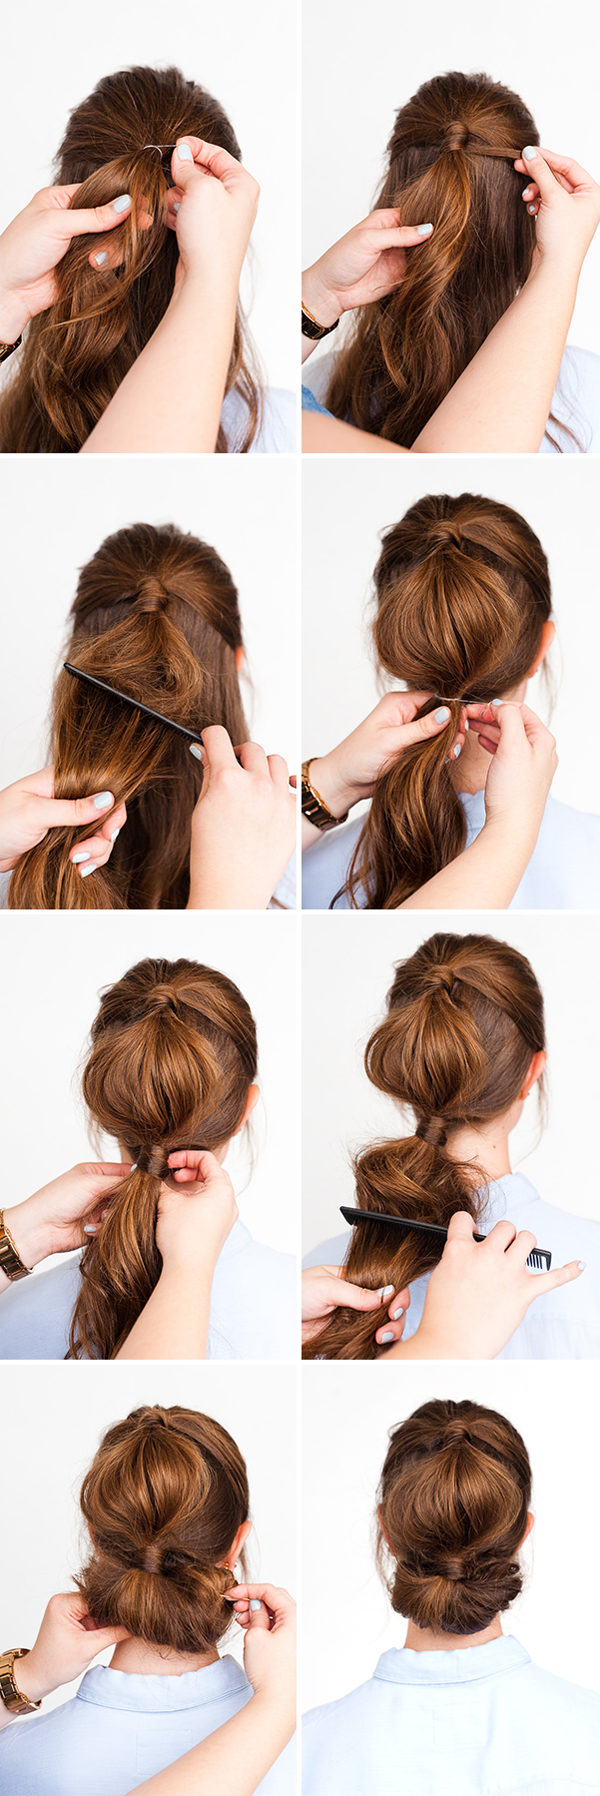 The Easiest DIY Hairstyle Tutorials To Shine Every Morning